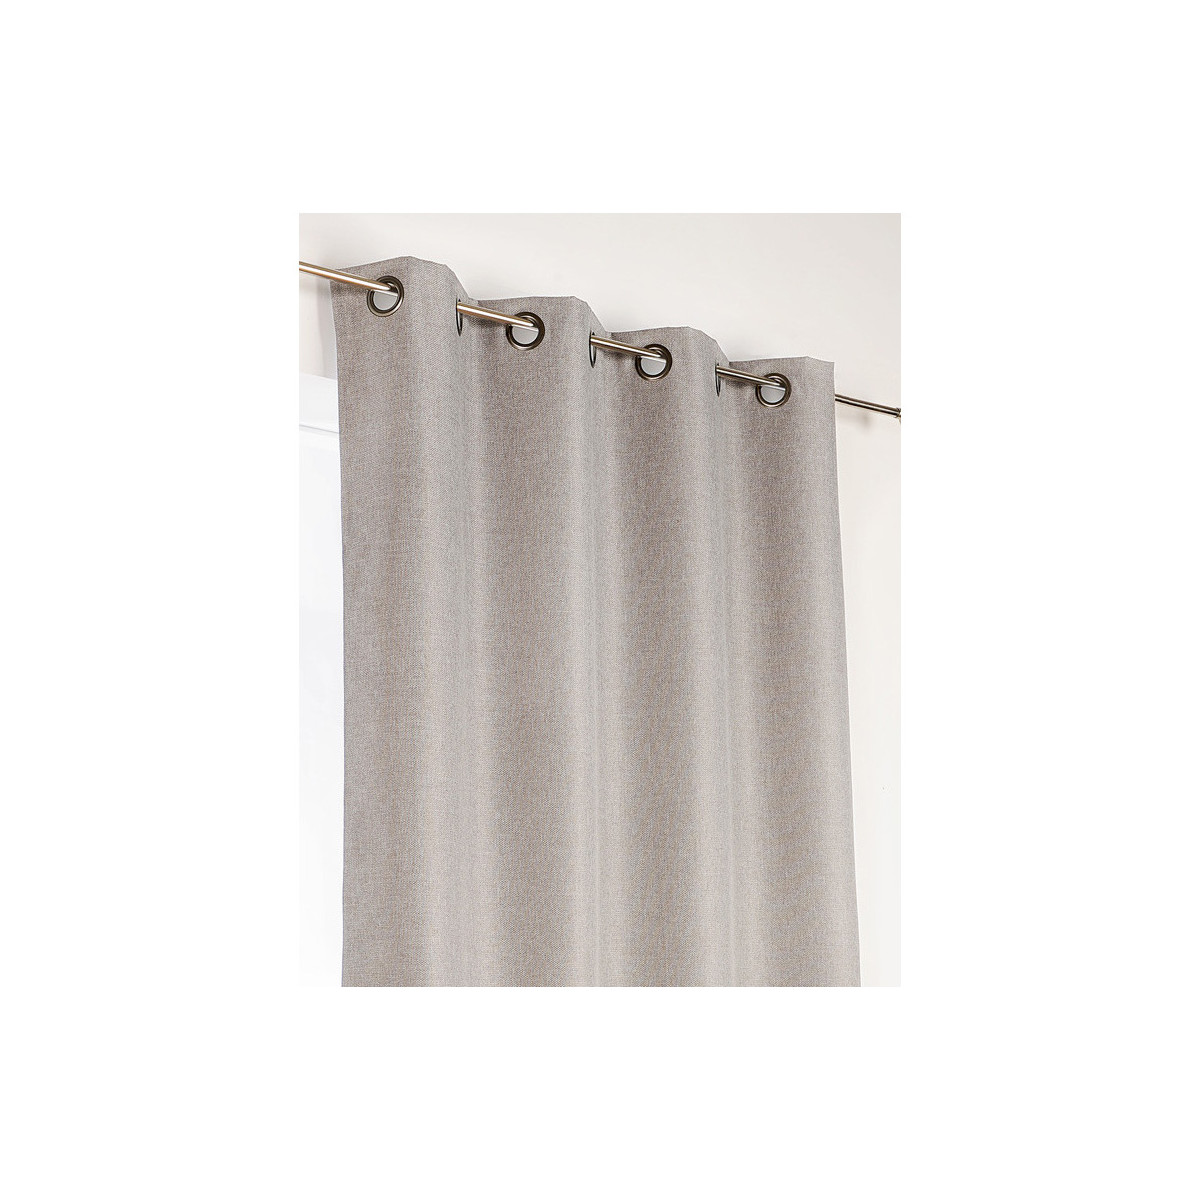 Home Curtains & blinds Linder CALYPSO OCCULTANT Grey